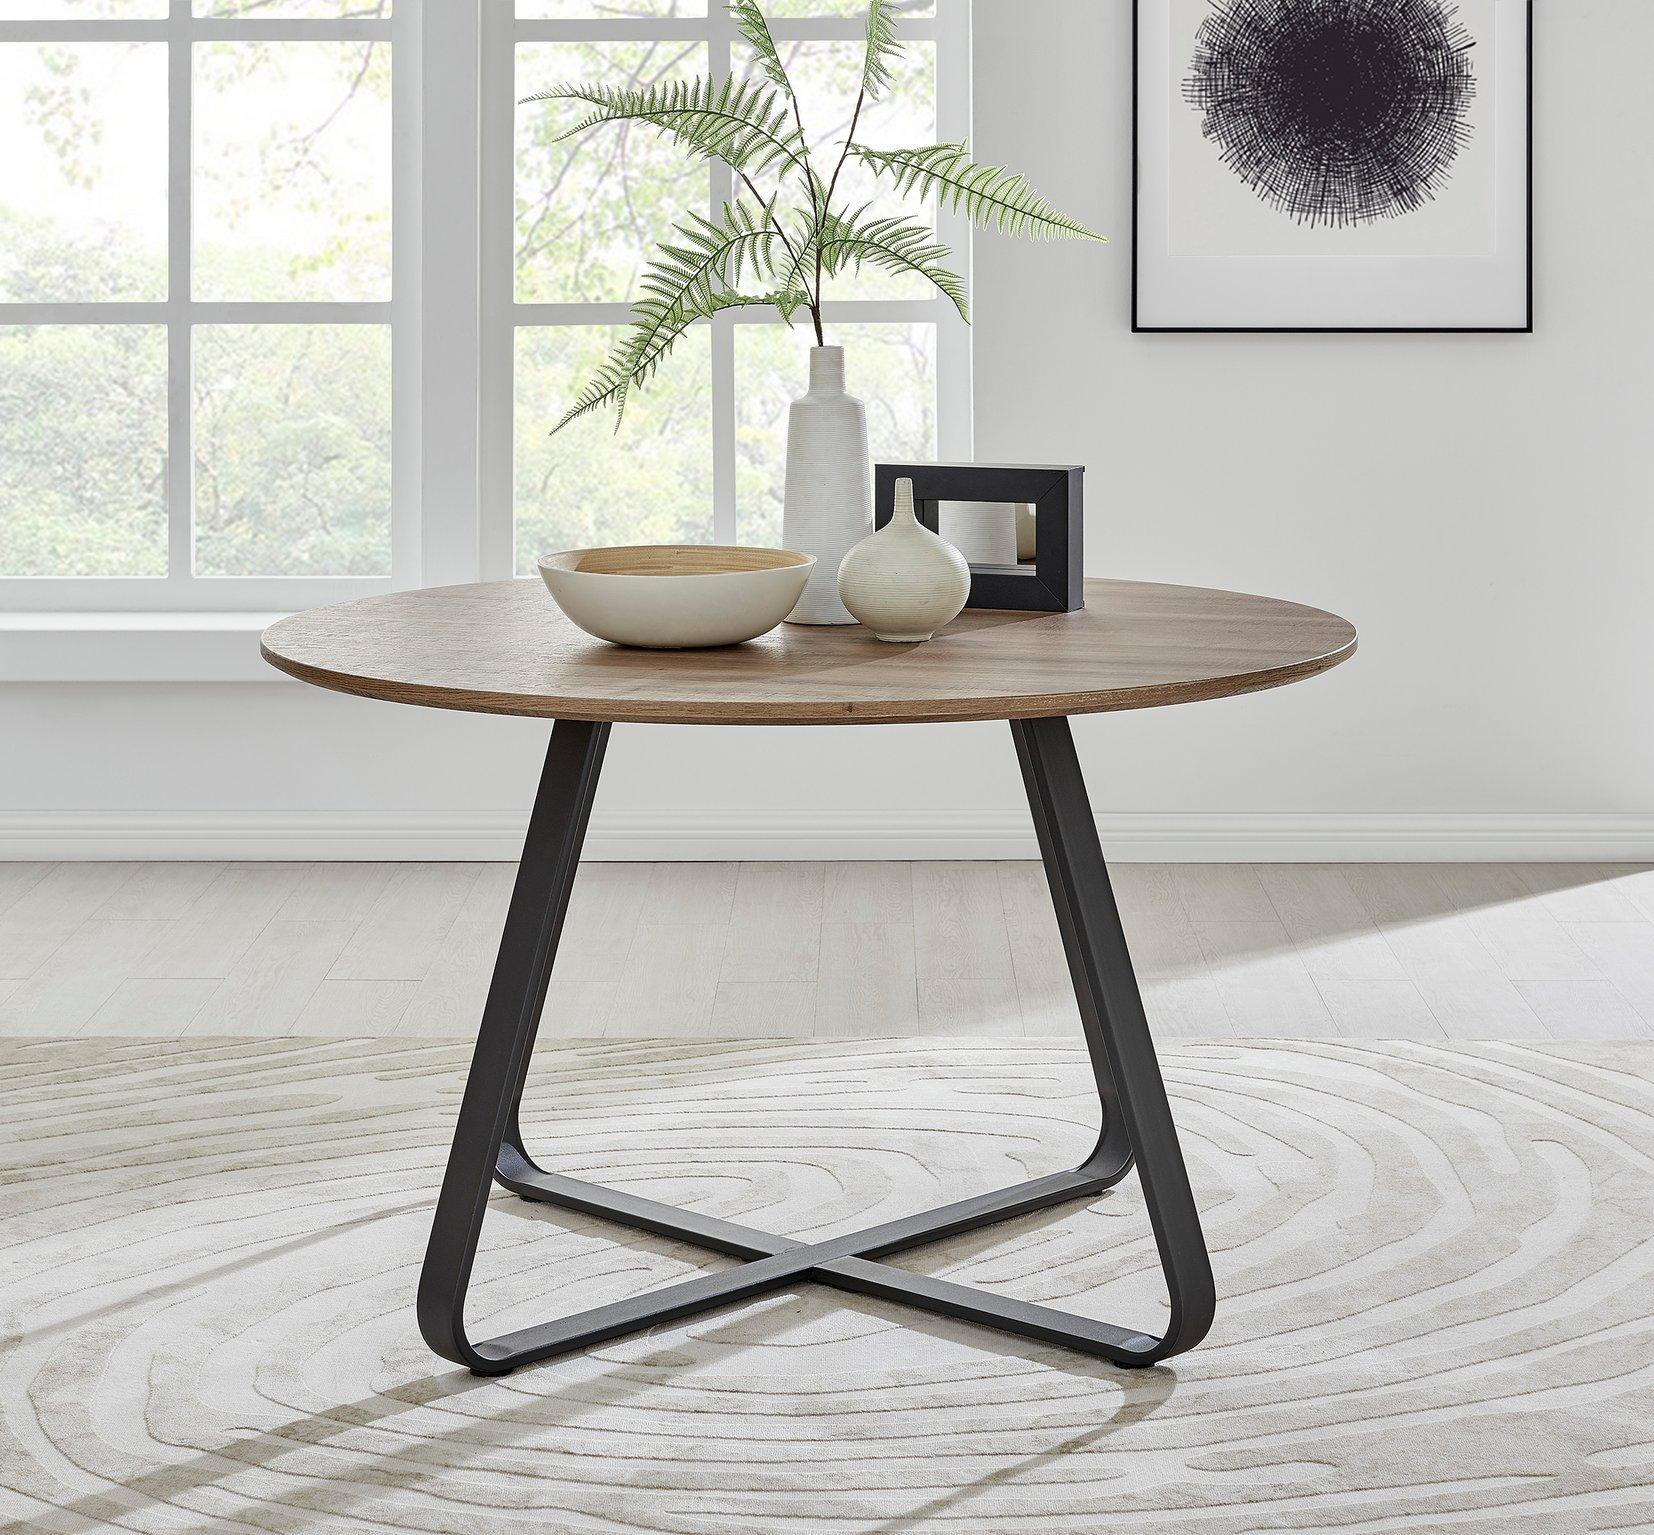 Santorini 120cm 6-Seater Contemporary Round Wood Dining Table